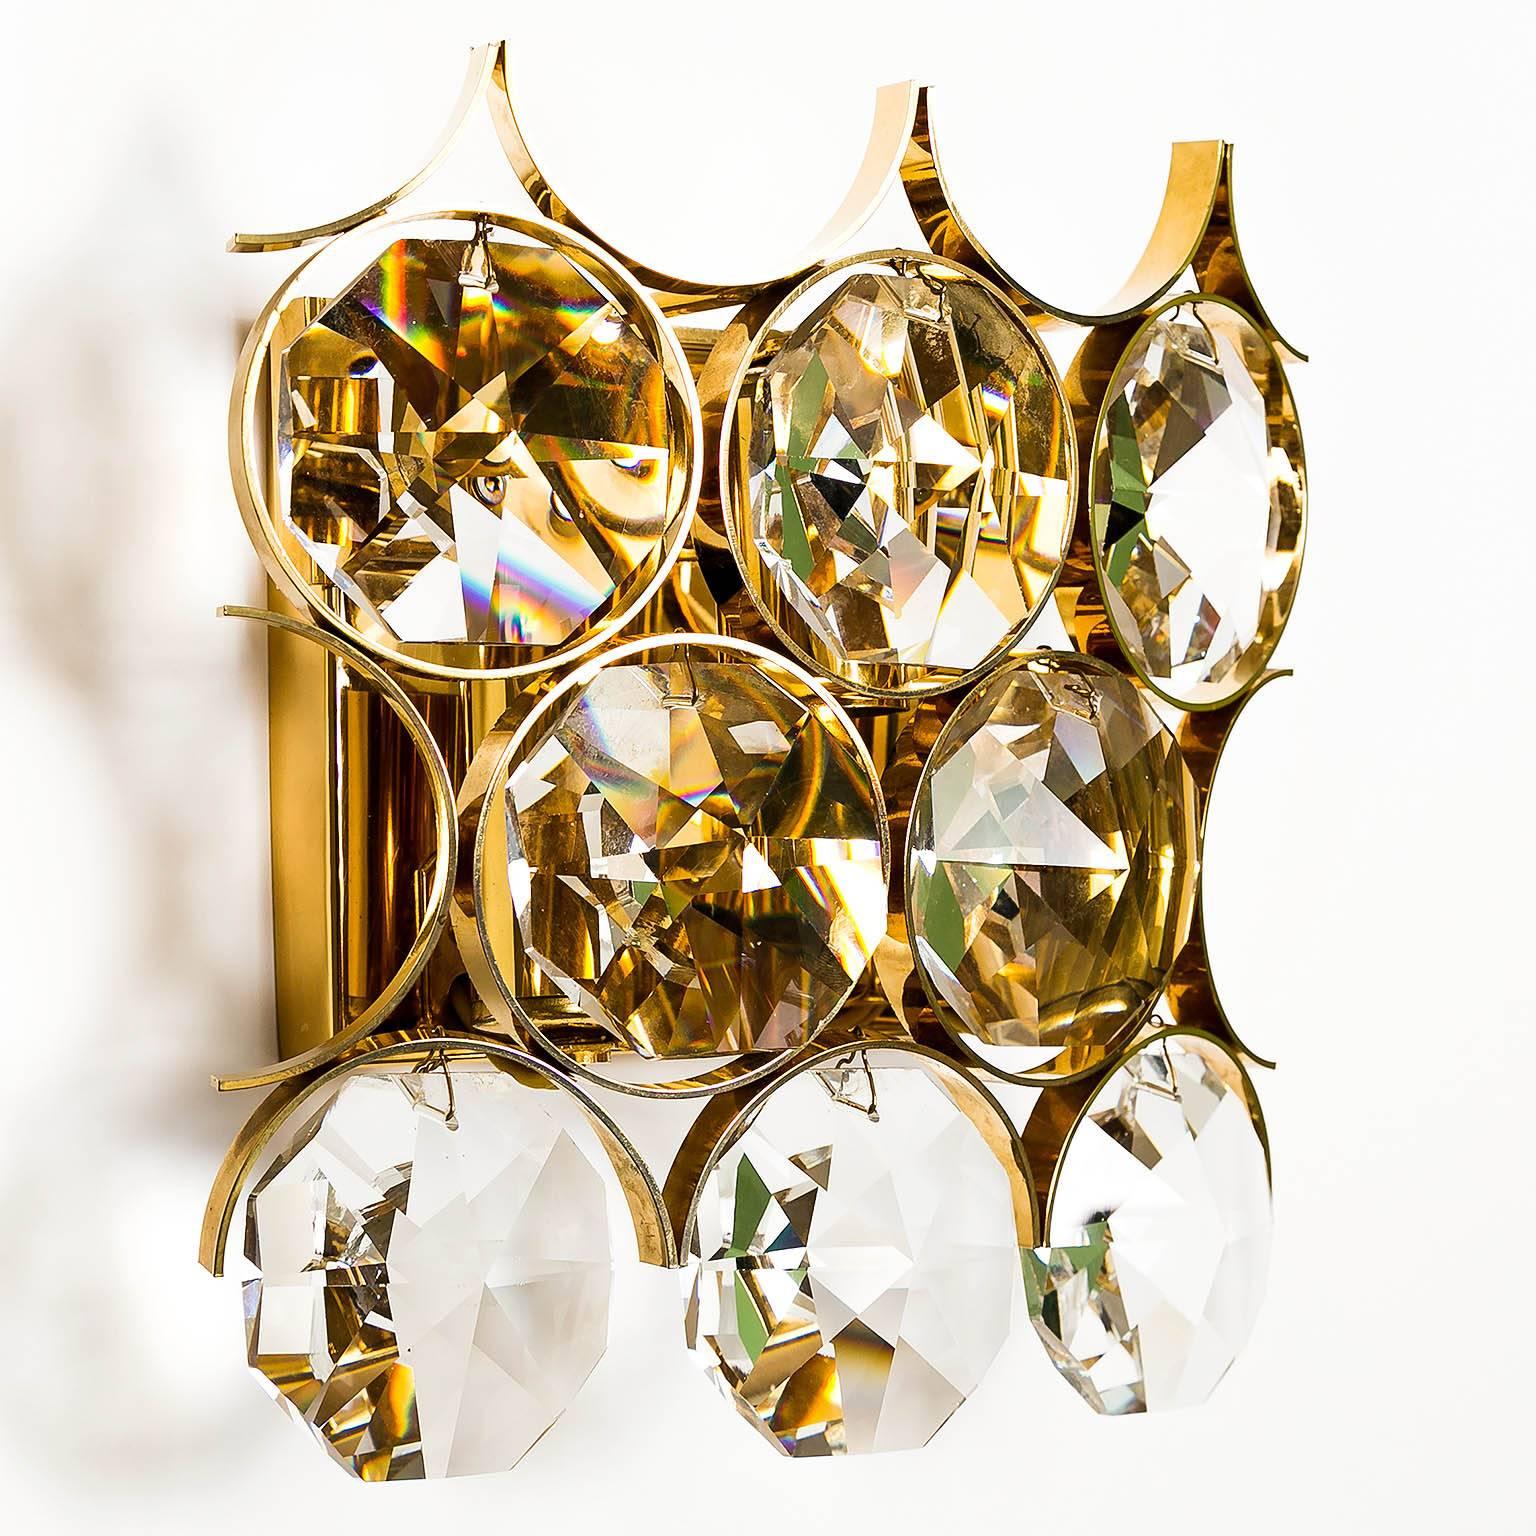 Hollywood Regency Pair of Palwa Sconces Wall Lights in Gilded Brass with Large Crystals, 1960s For Sale